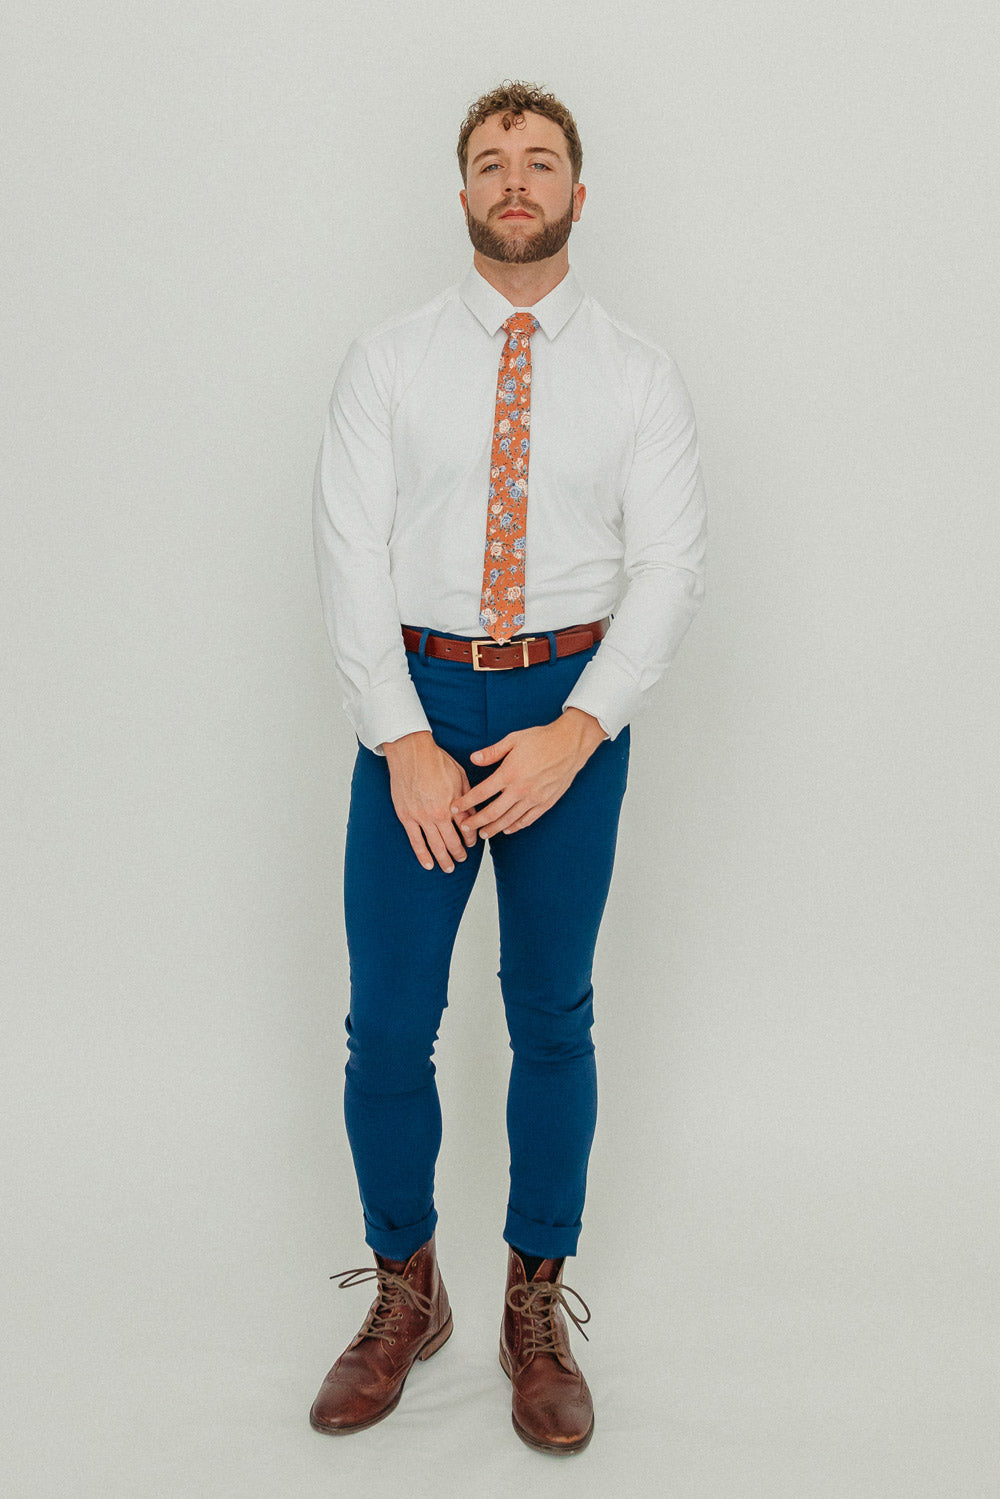 Western tie worn with a white shirt, brown belt and blue pants.